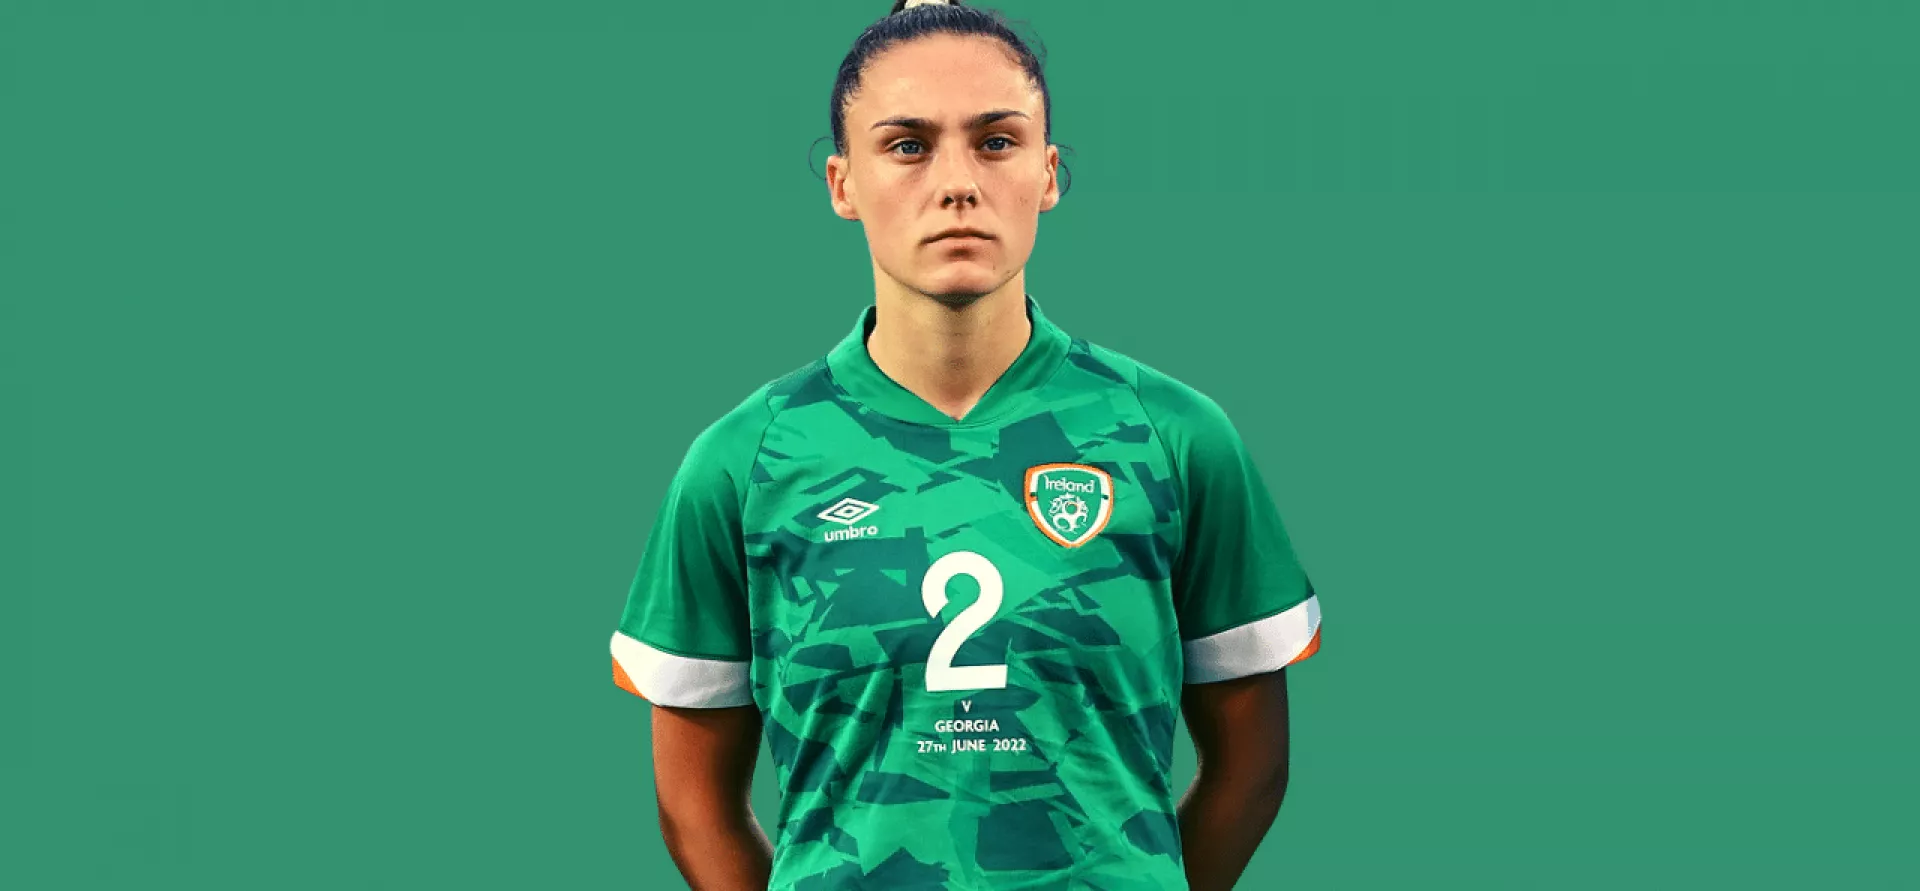 Jessica Ziu Ready To Star For Ireland After Finding Her Feet In The Professional Ranks